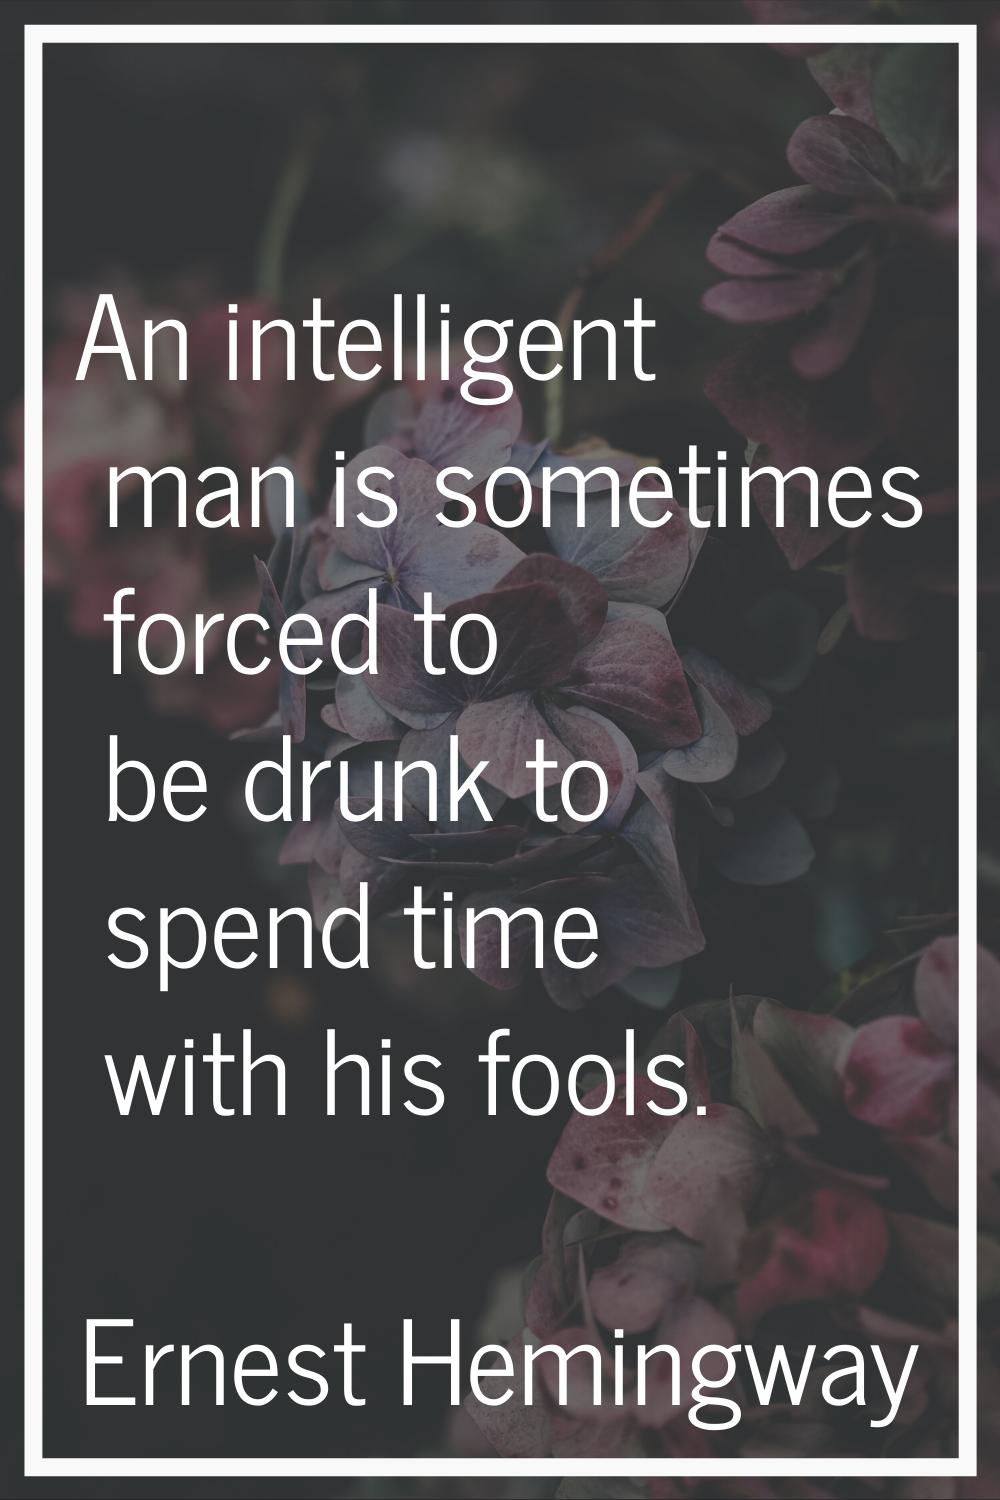 An intelligent man is sometimes forced to be drunk to spend time with his fools.